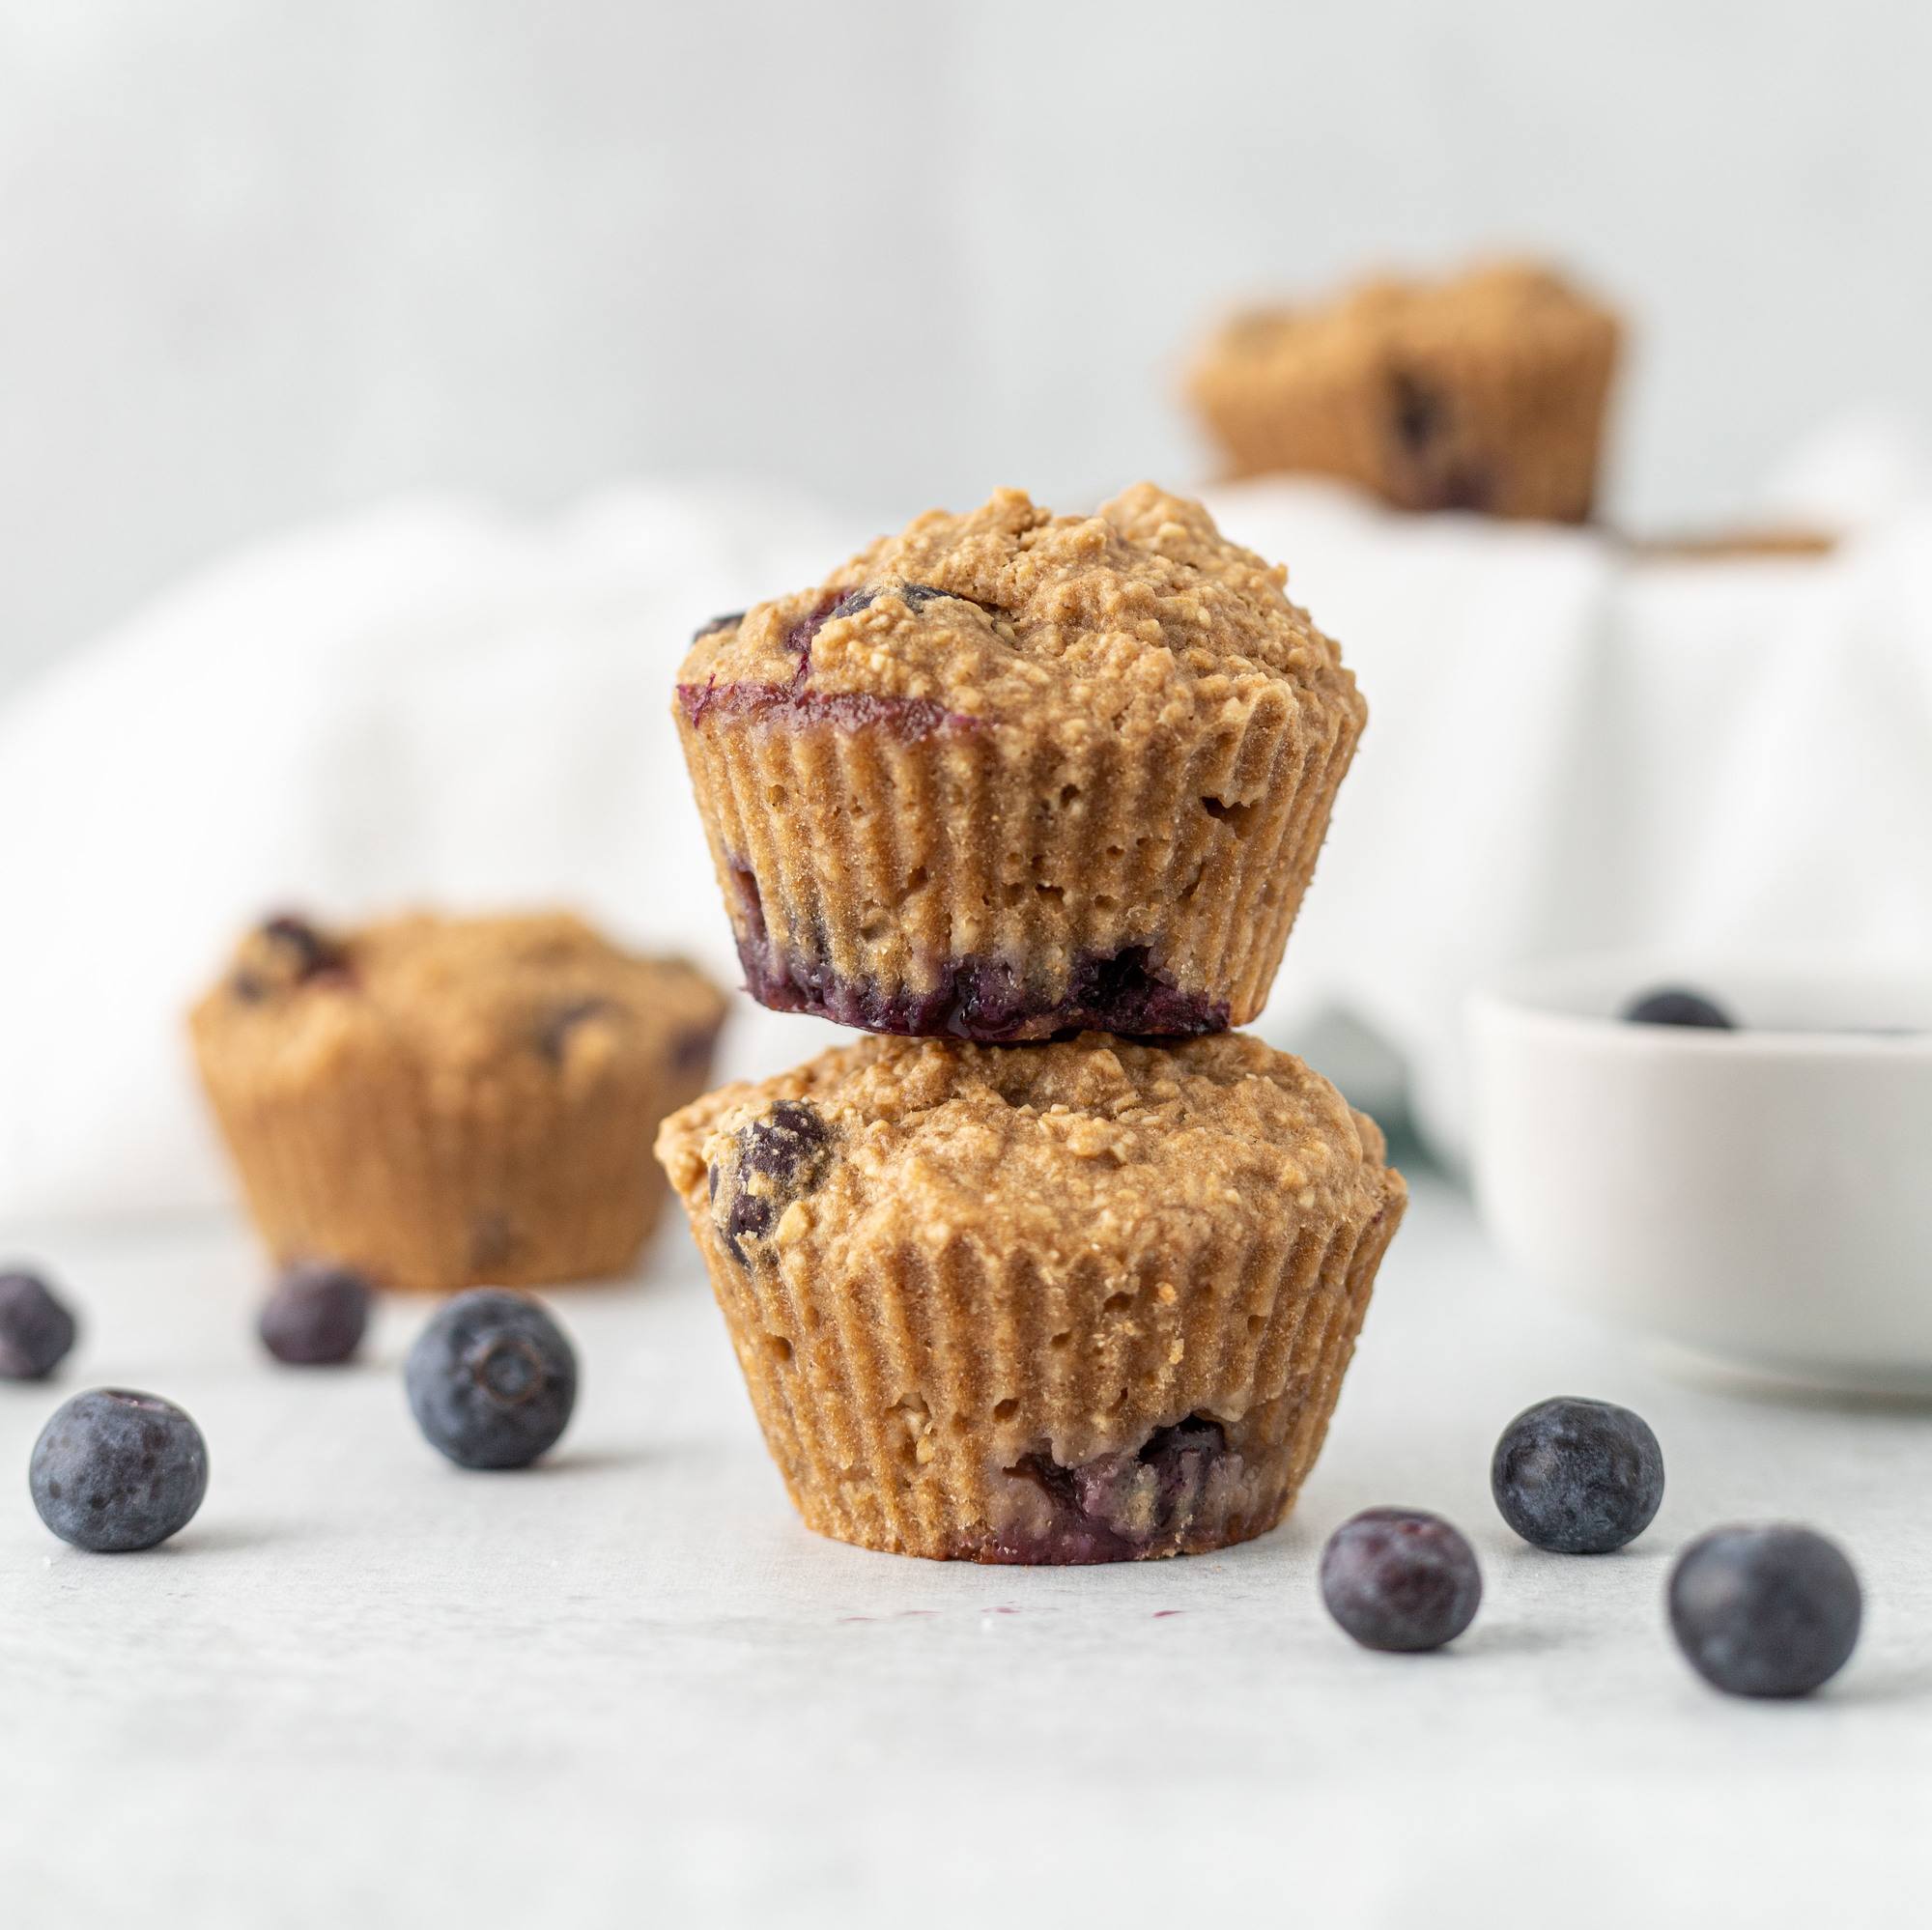 https://www.themaasclinic.com/wp-content/uploads/2020/11/Maas_Clinic_Paleo_Blueberry_Muffins-1-scaled.jpg